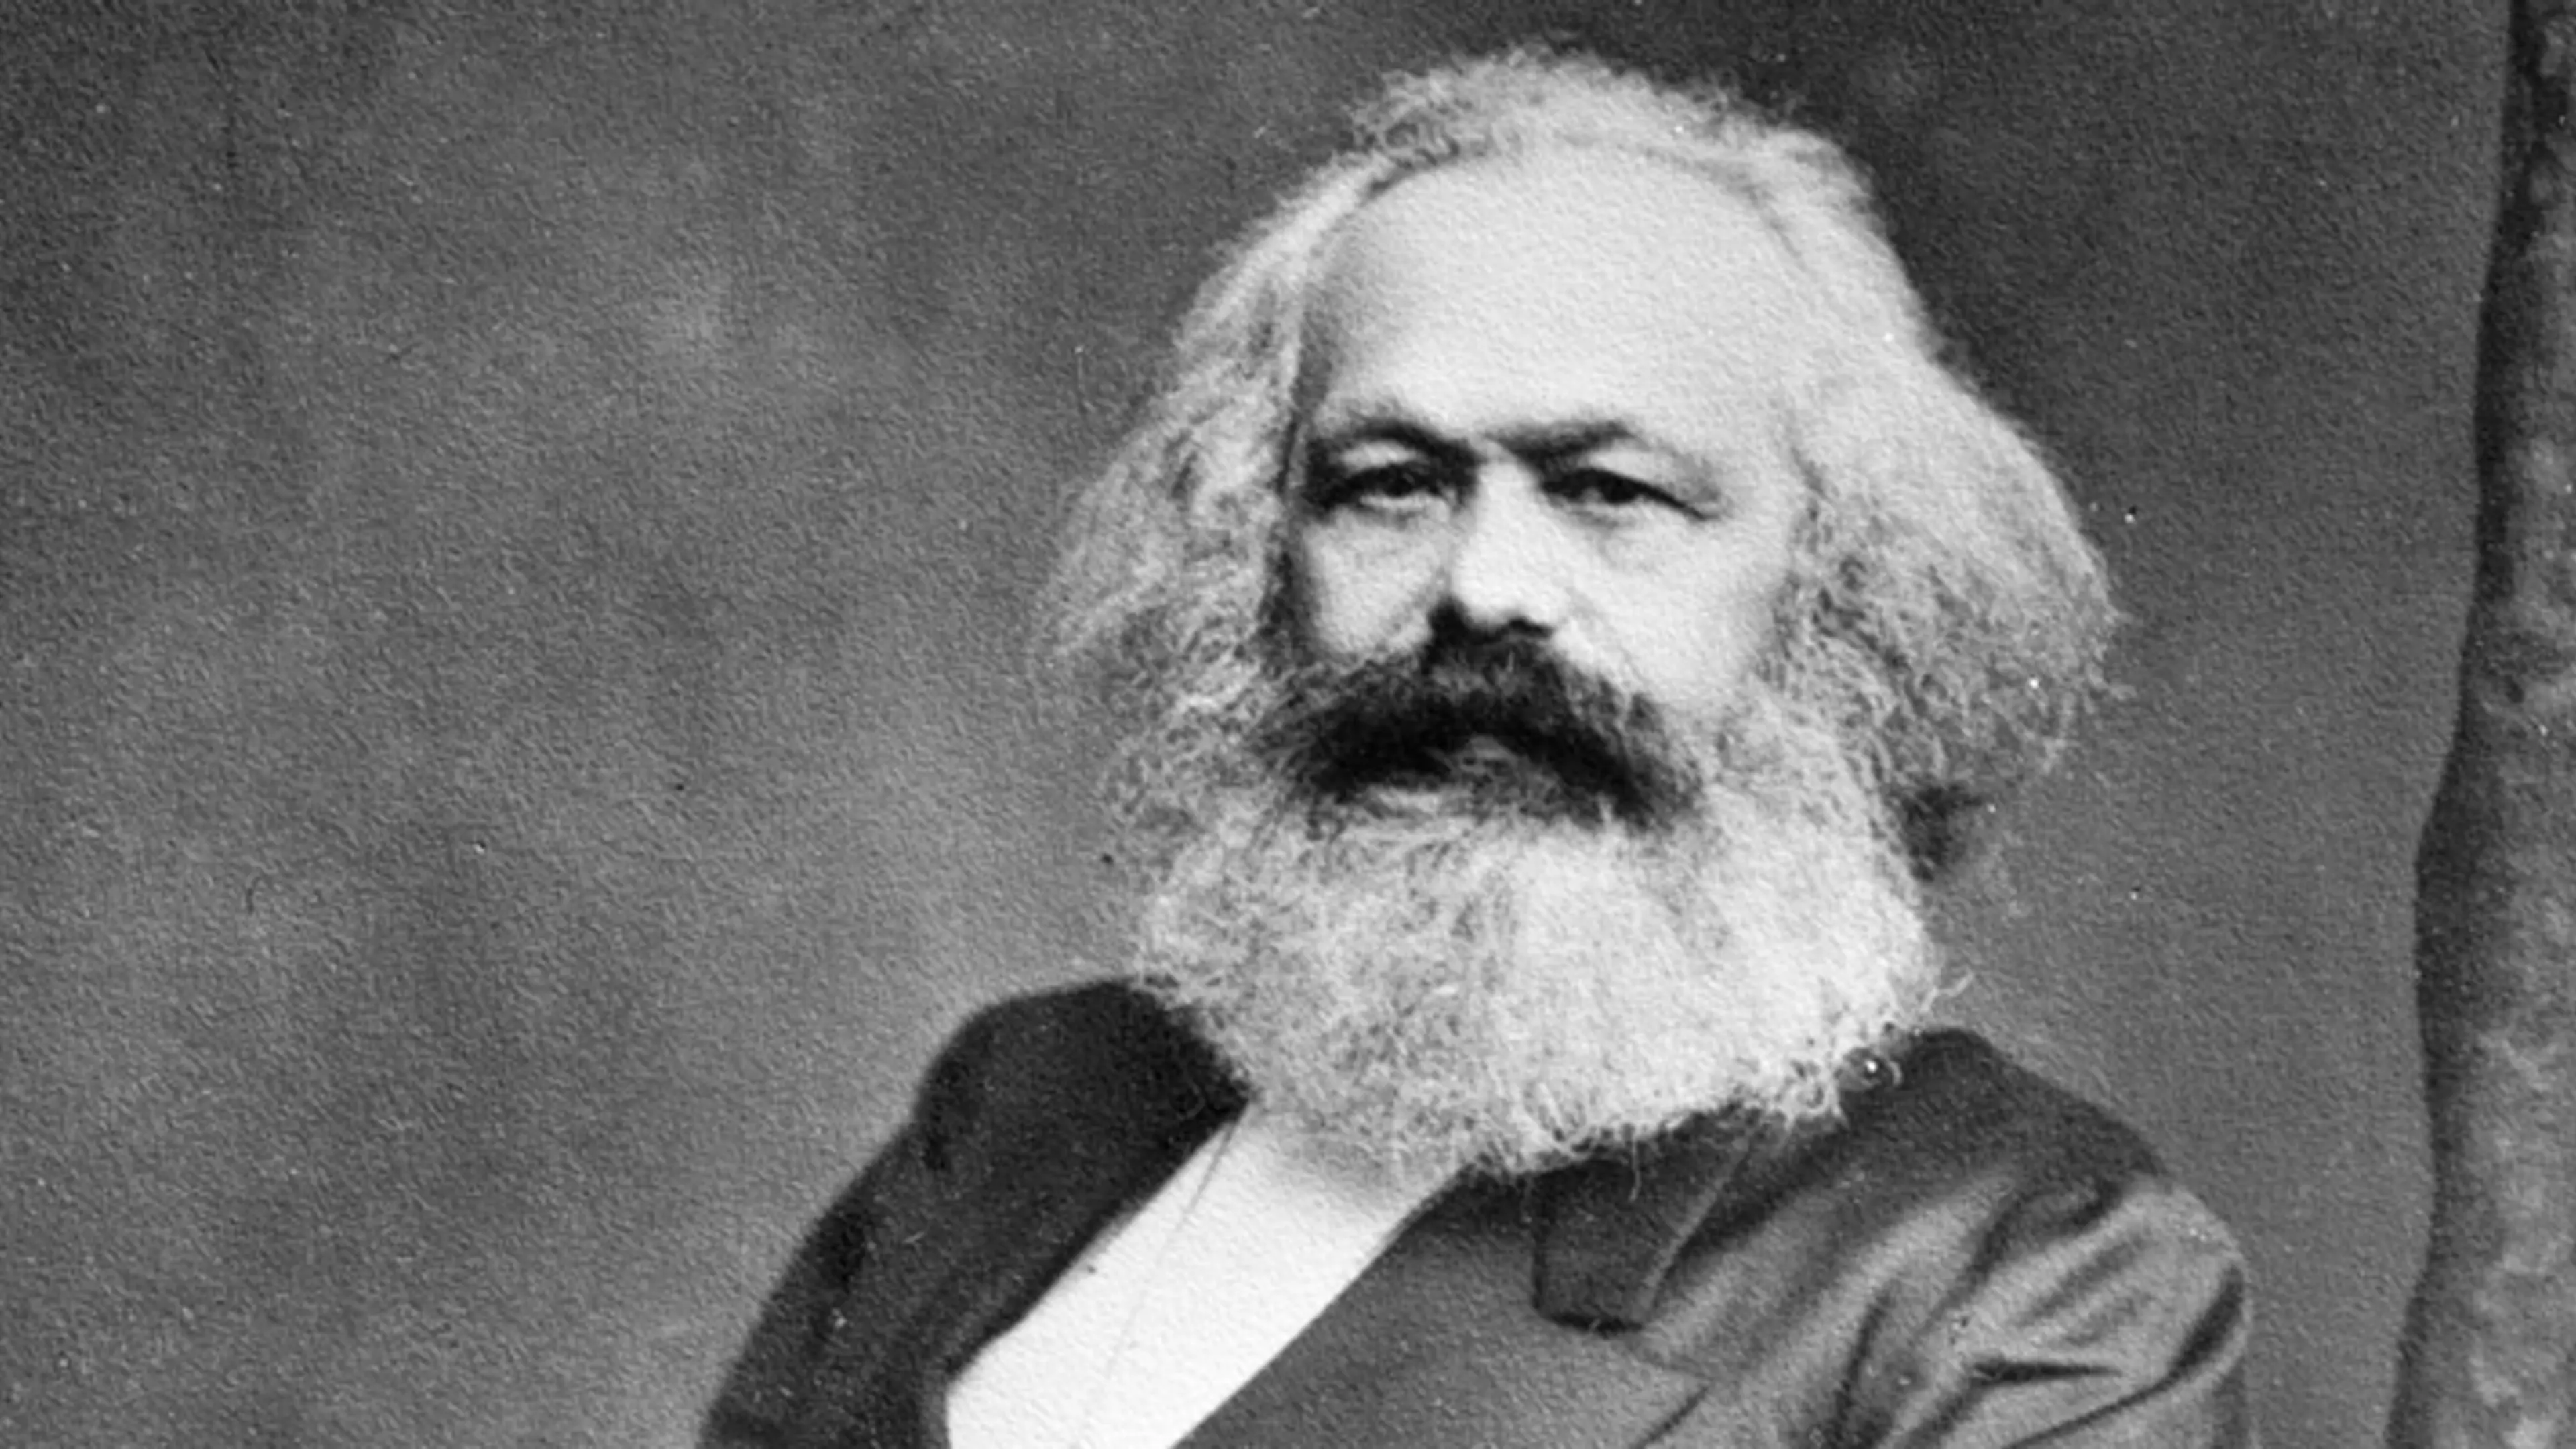 20 quotes from the great German socialist and philosopher, Karl Marx